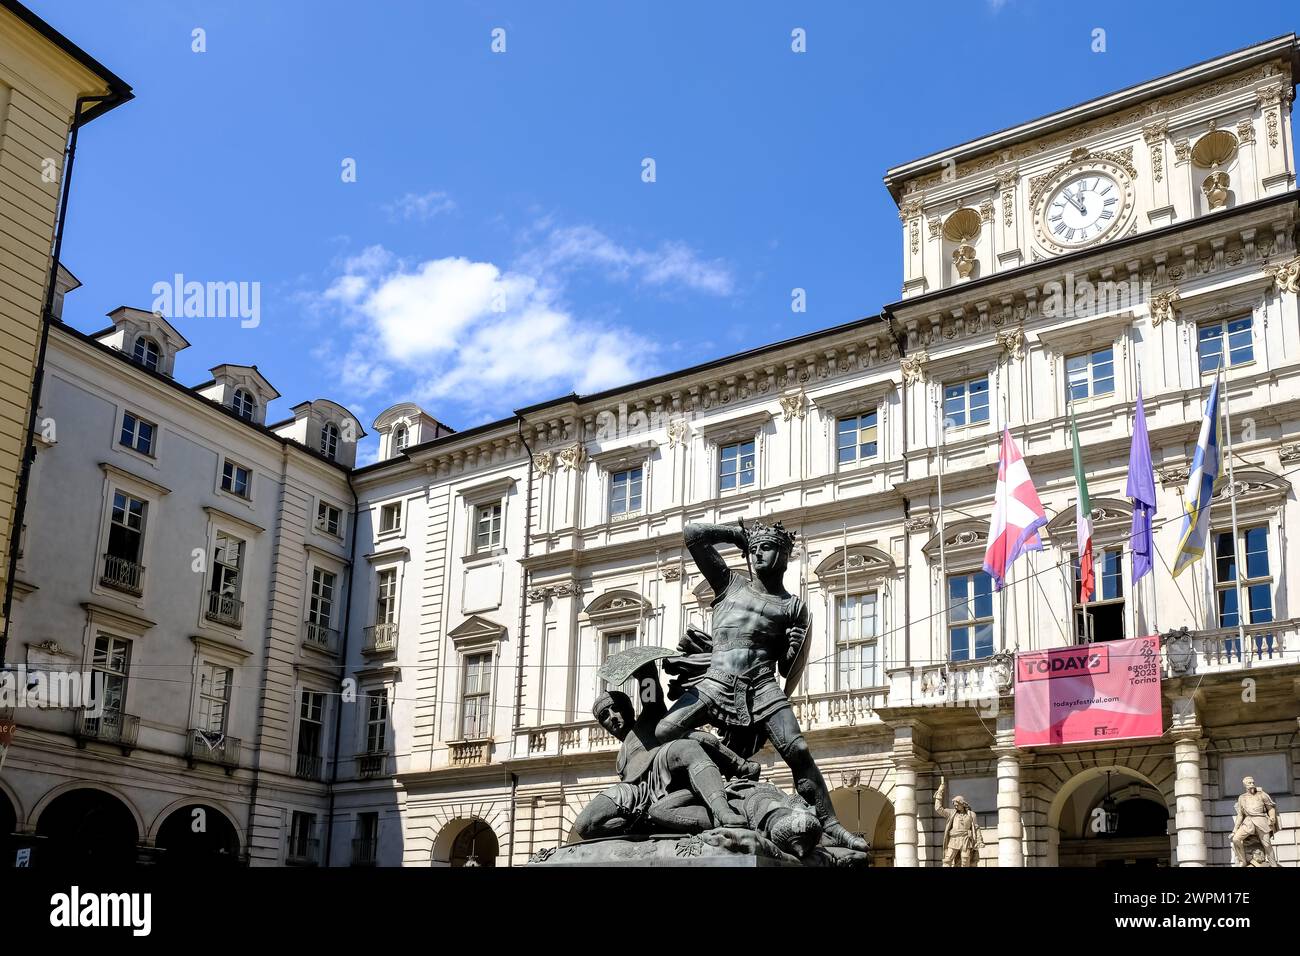 View of Piazza Palazzo di Citta, a central square built on the site of the ancient Roman city, and location of Palazzo Civico, Turin, Piedmont, Italy Stock Photo